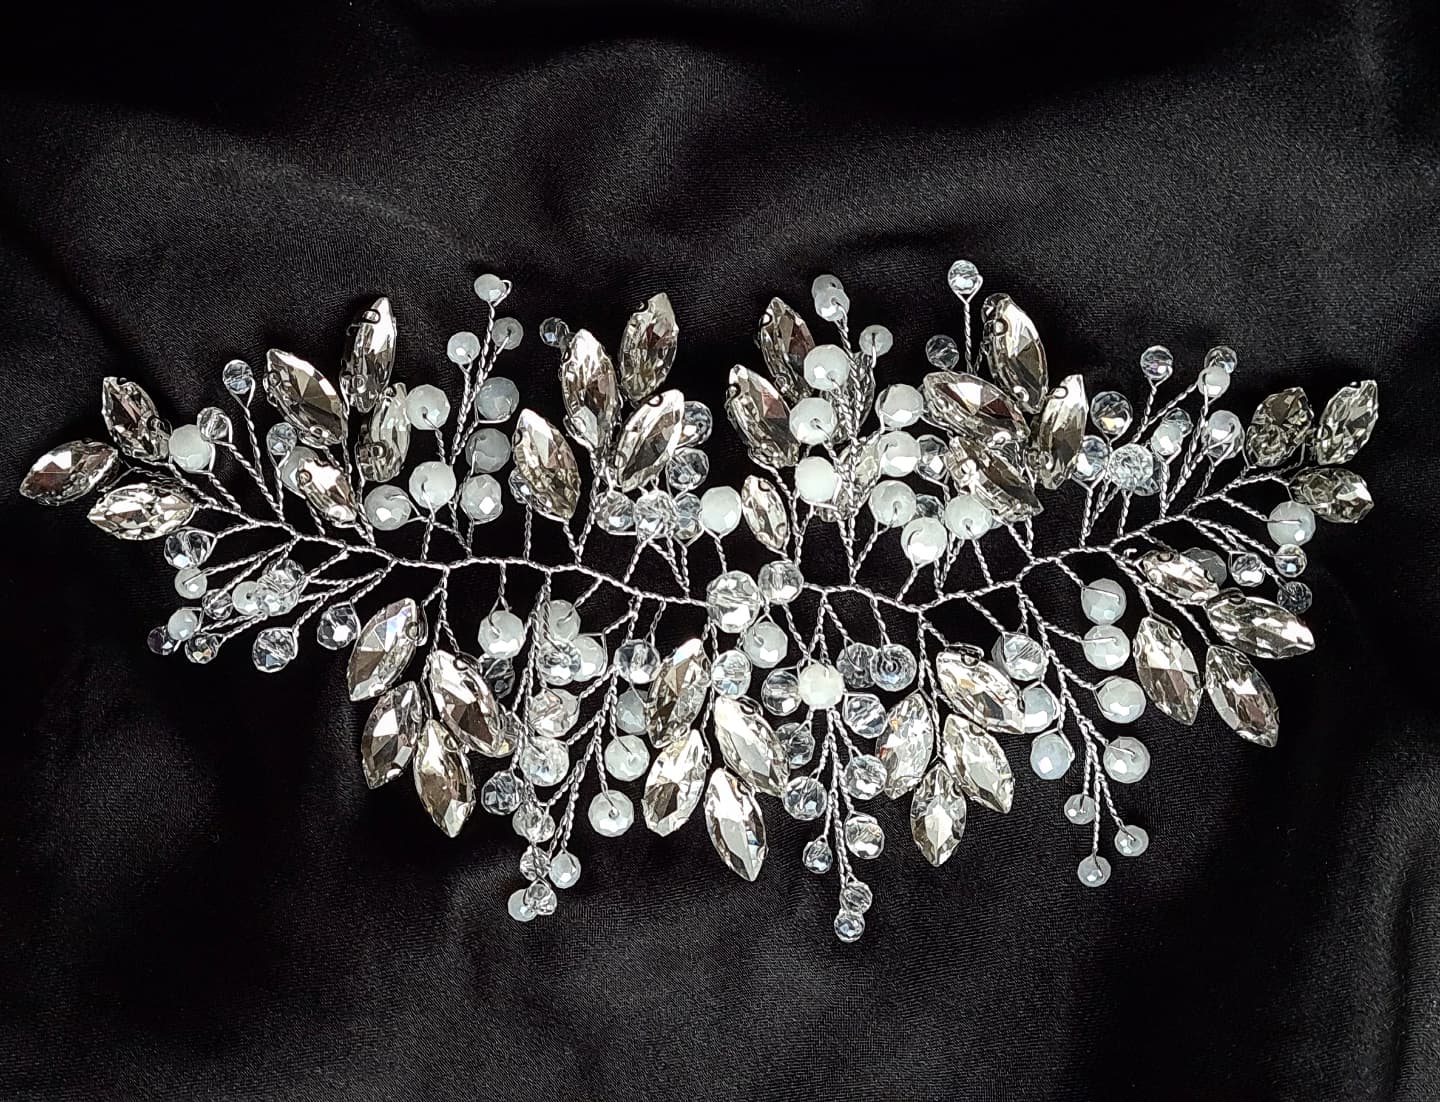 Intricate silver bridal headpiece, "Angela Headpiece" features sparkling stones, perfect for any hair style